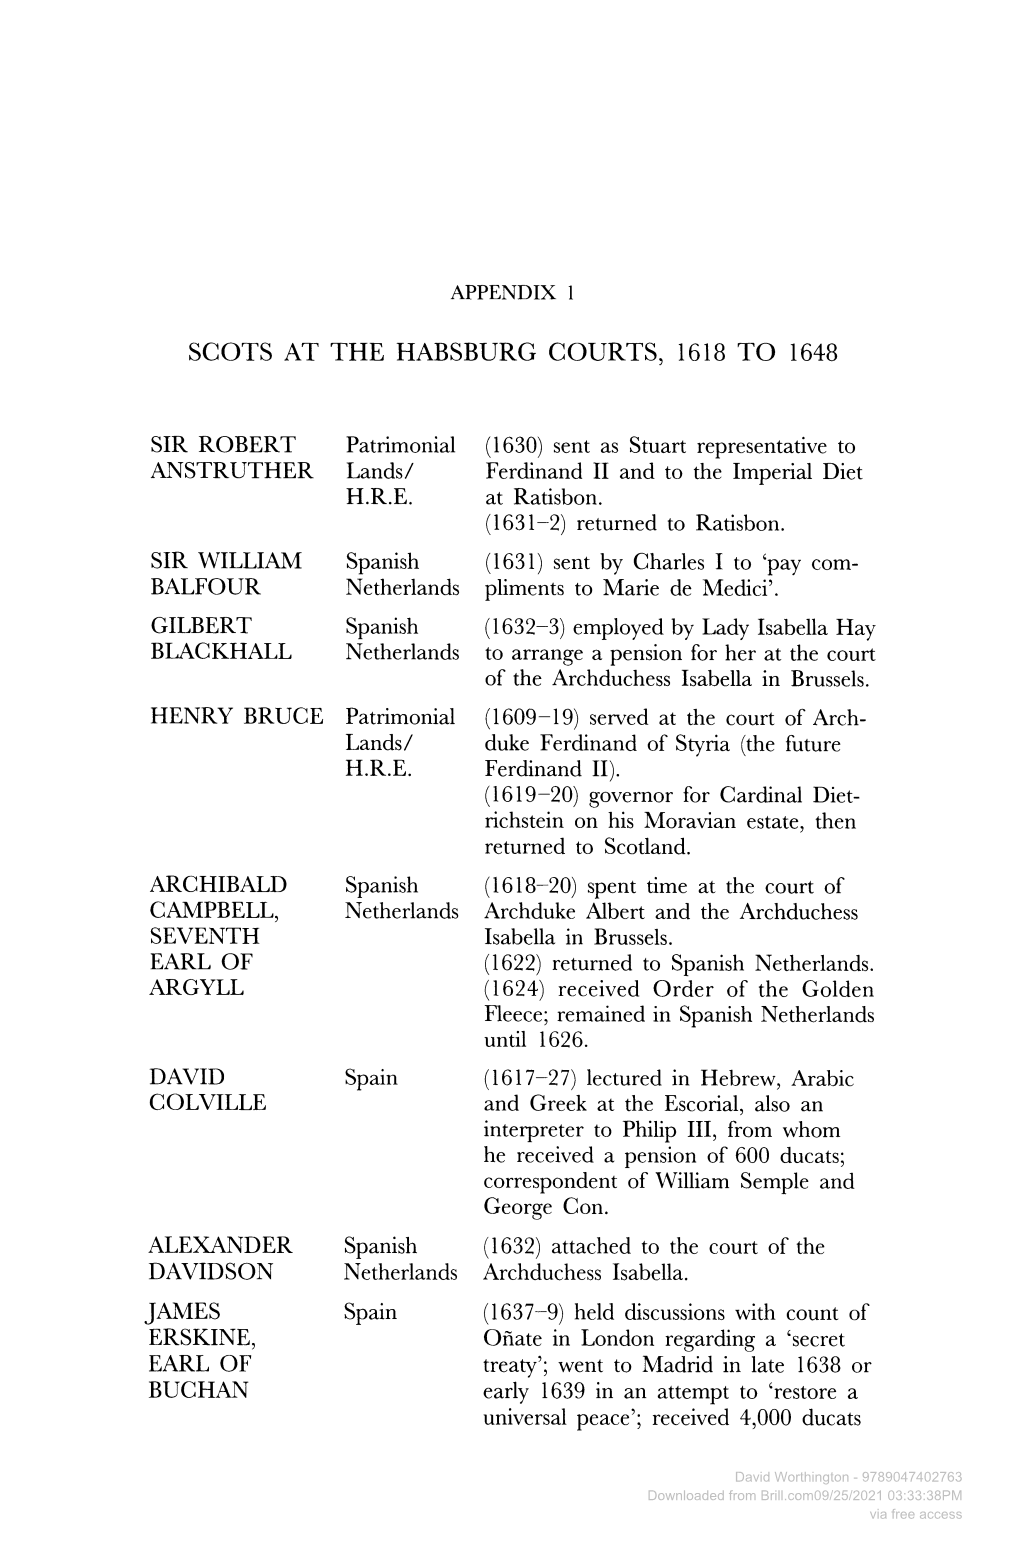 Scots at the Habsburg Courts, 1618 to 1648